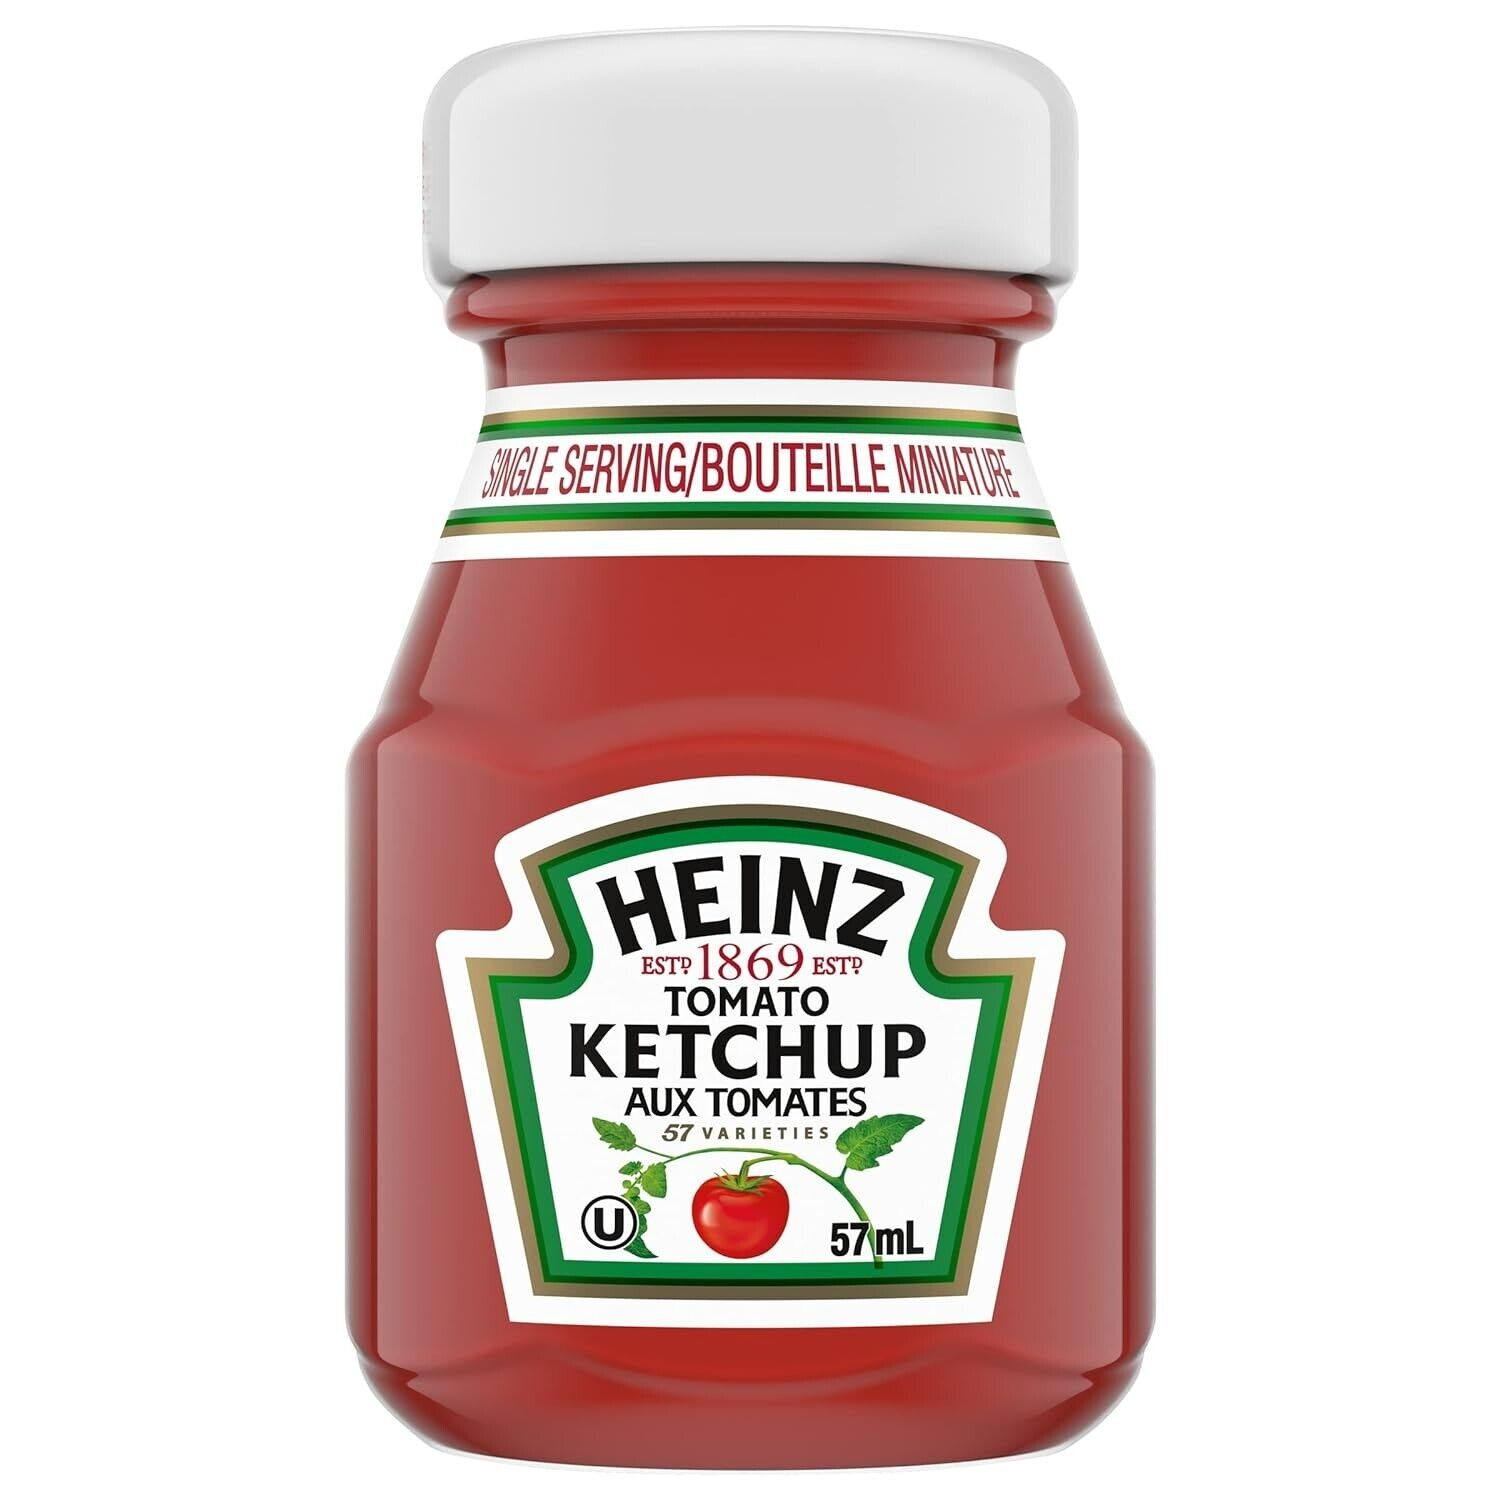 Set of 3 Heinz Tomato KETCHUP MINI GLASS Bottles 2.25 oz New and Sealed